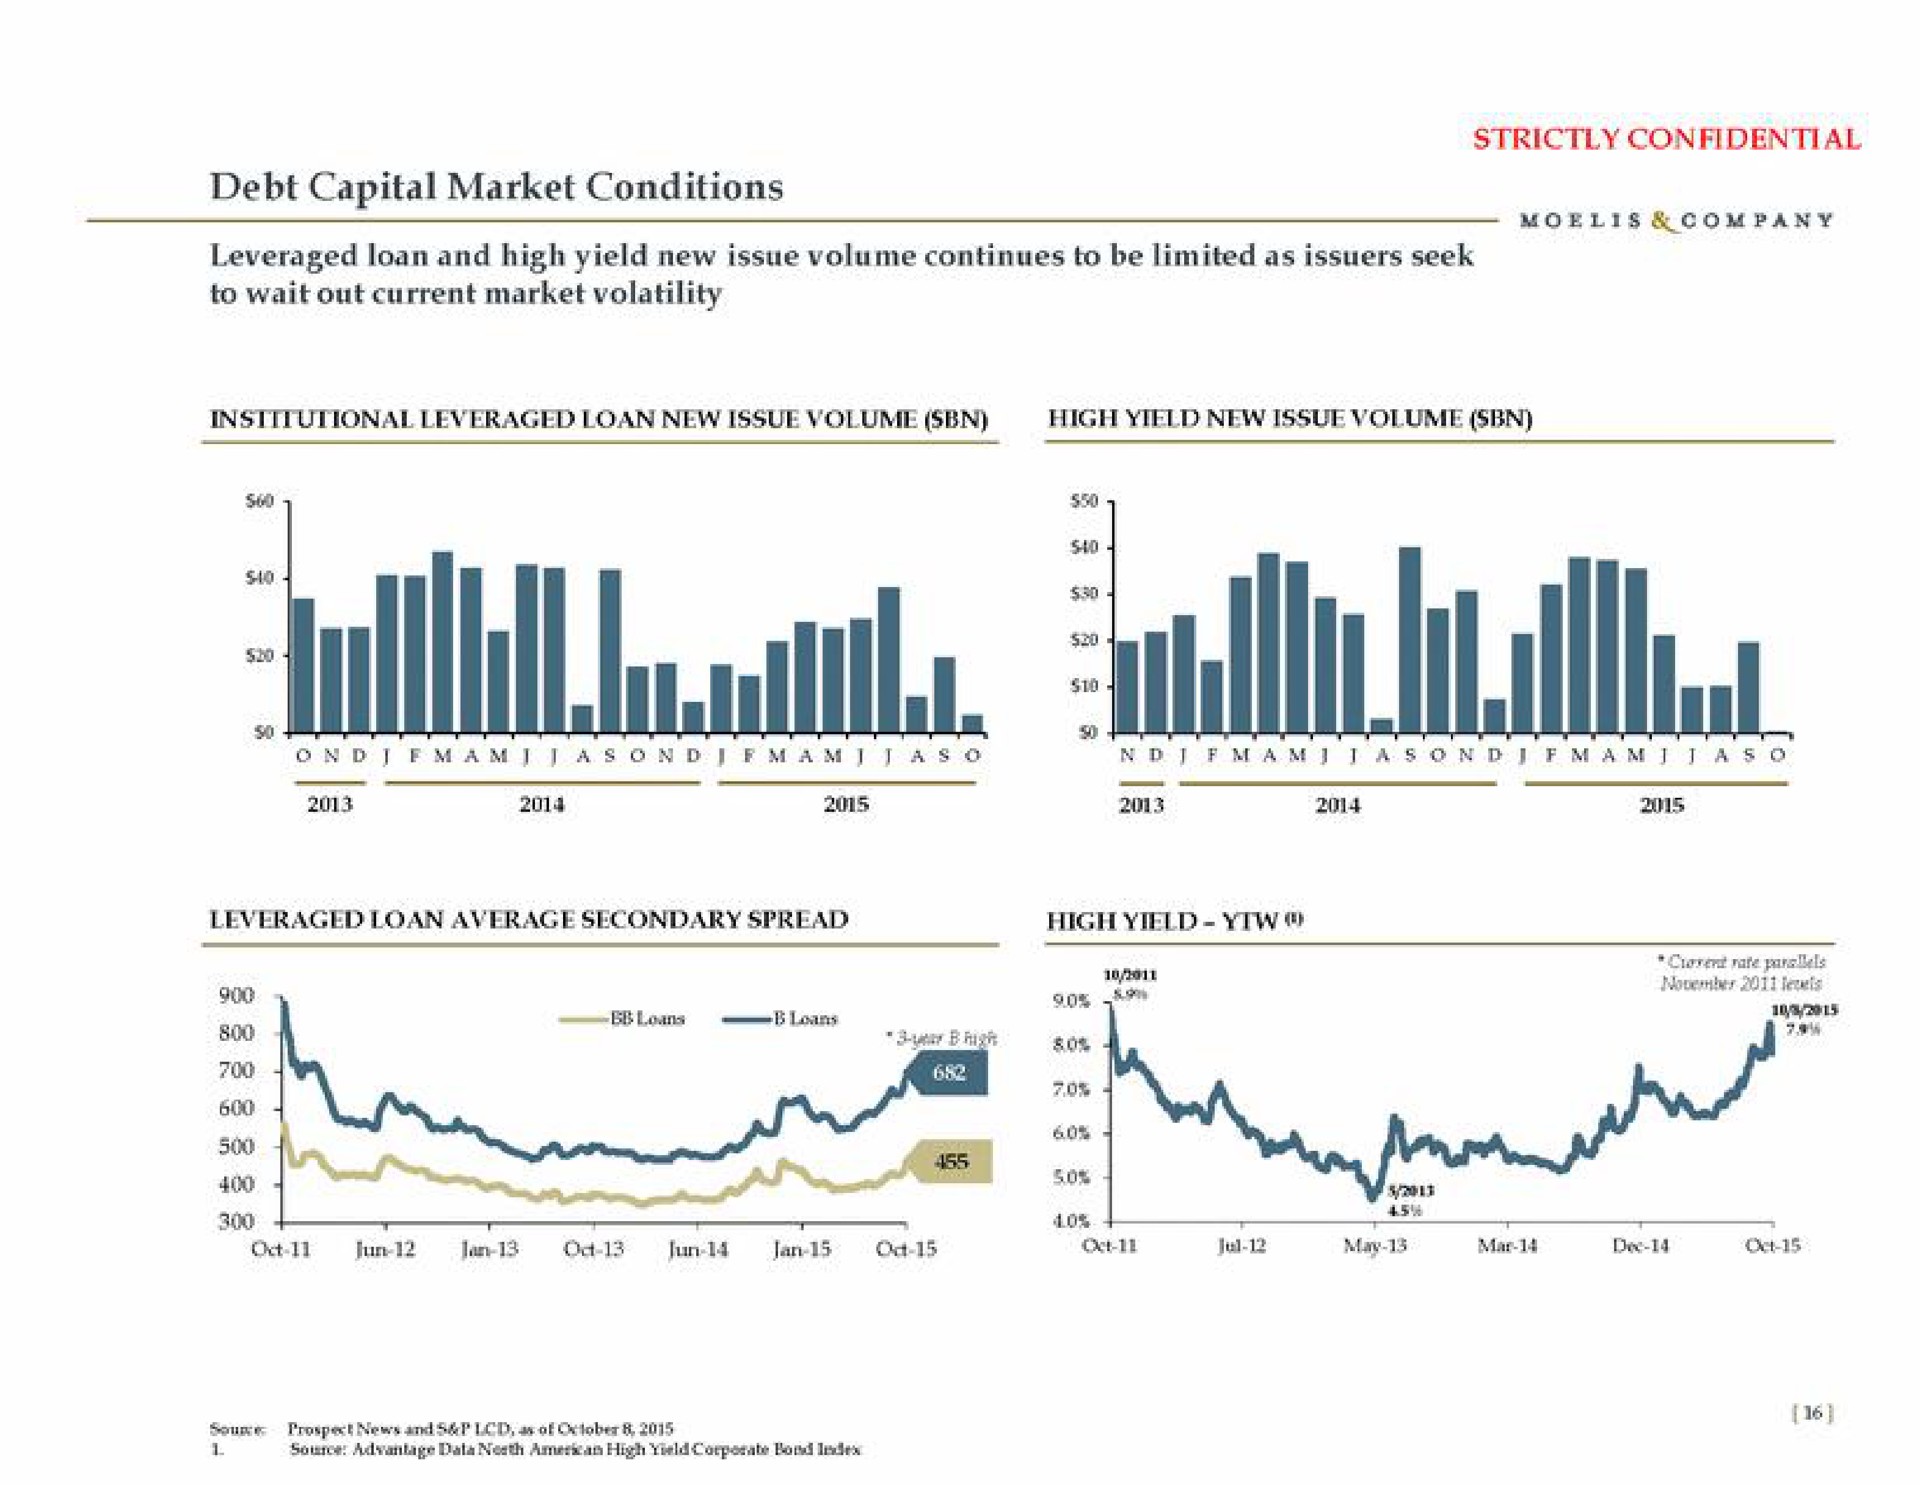 debt capital market conditions high yield new issue volume | Moelis & Company